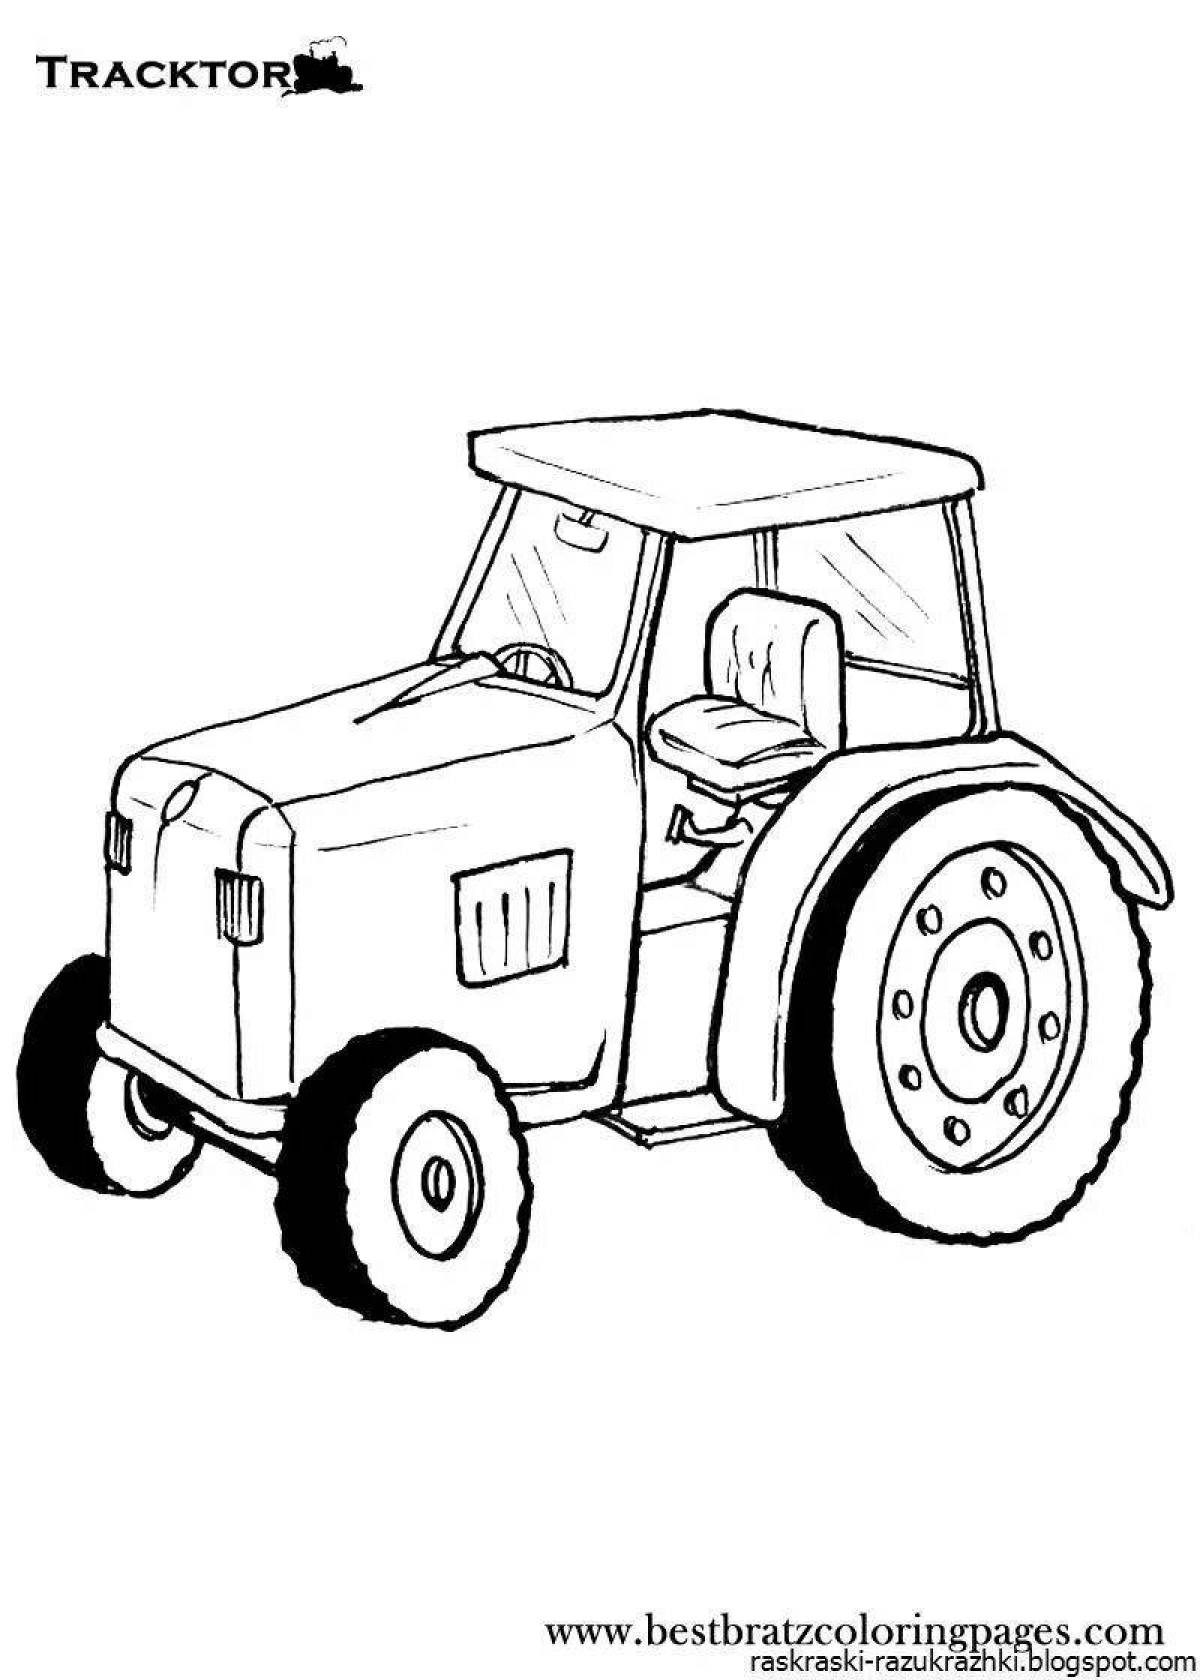 Playful drawing of a tractor